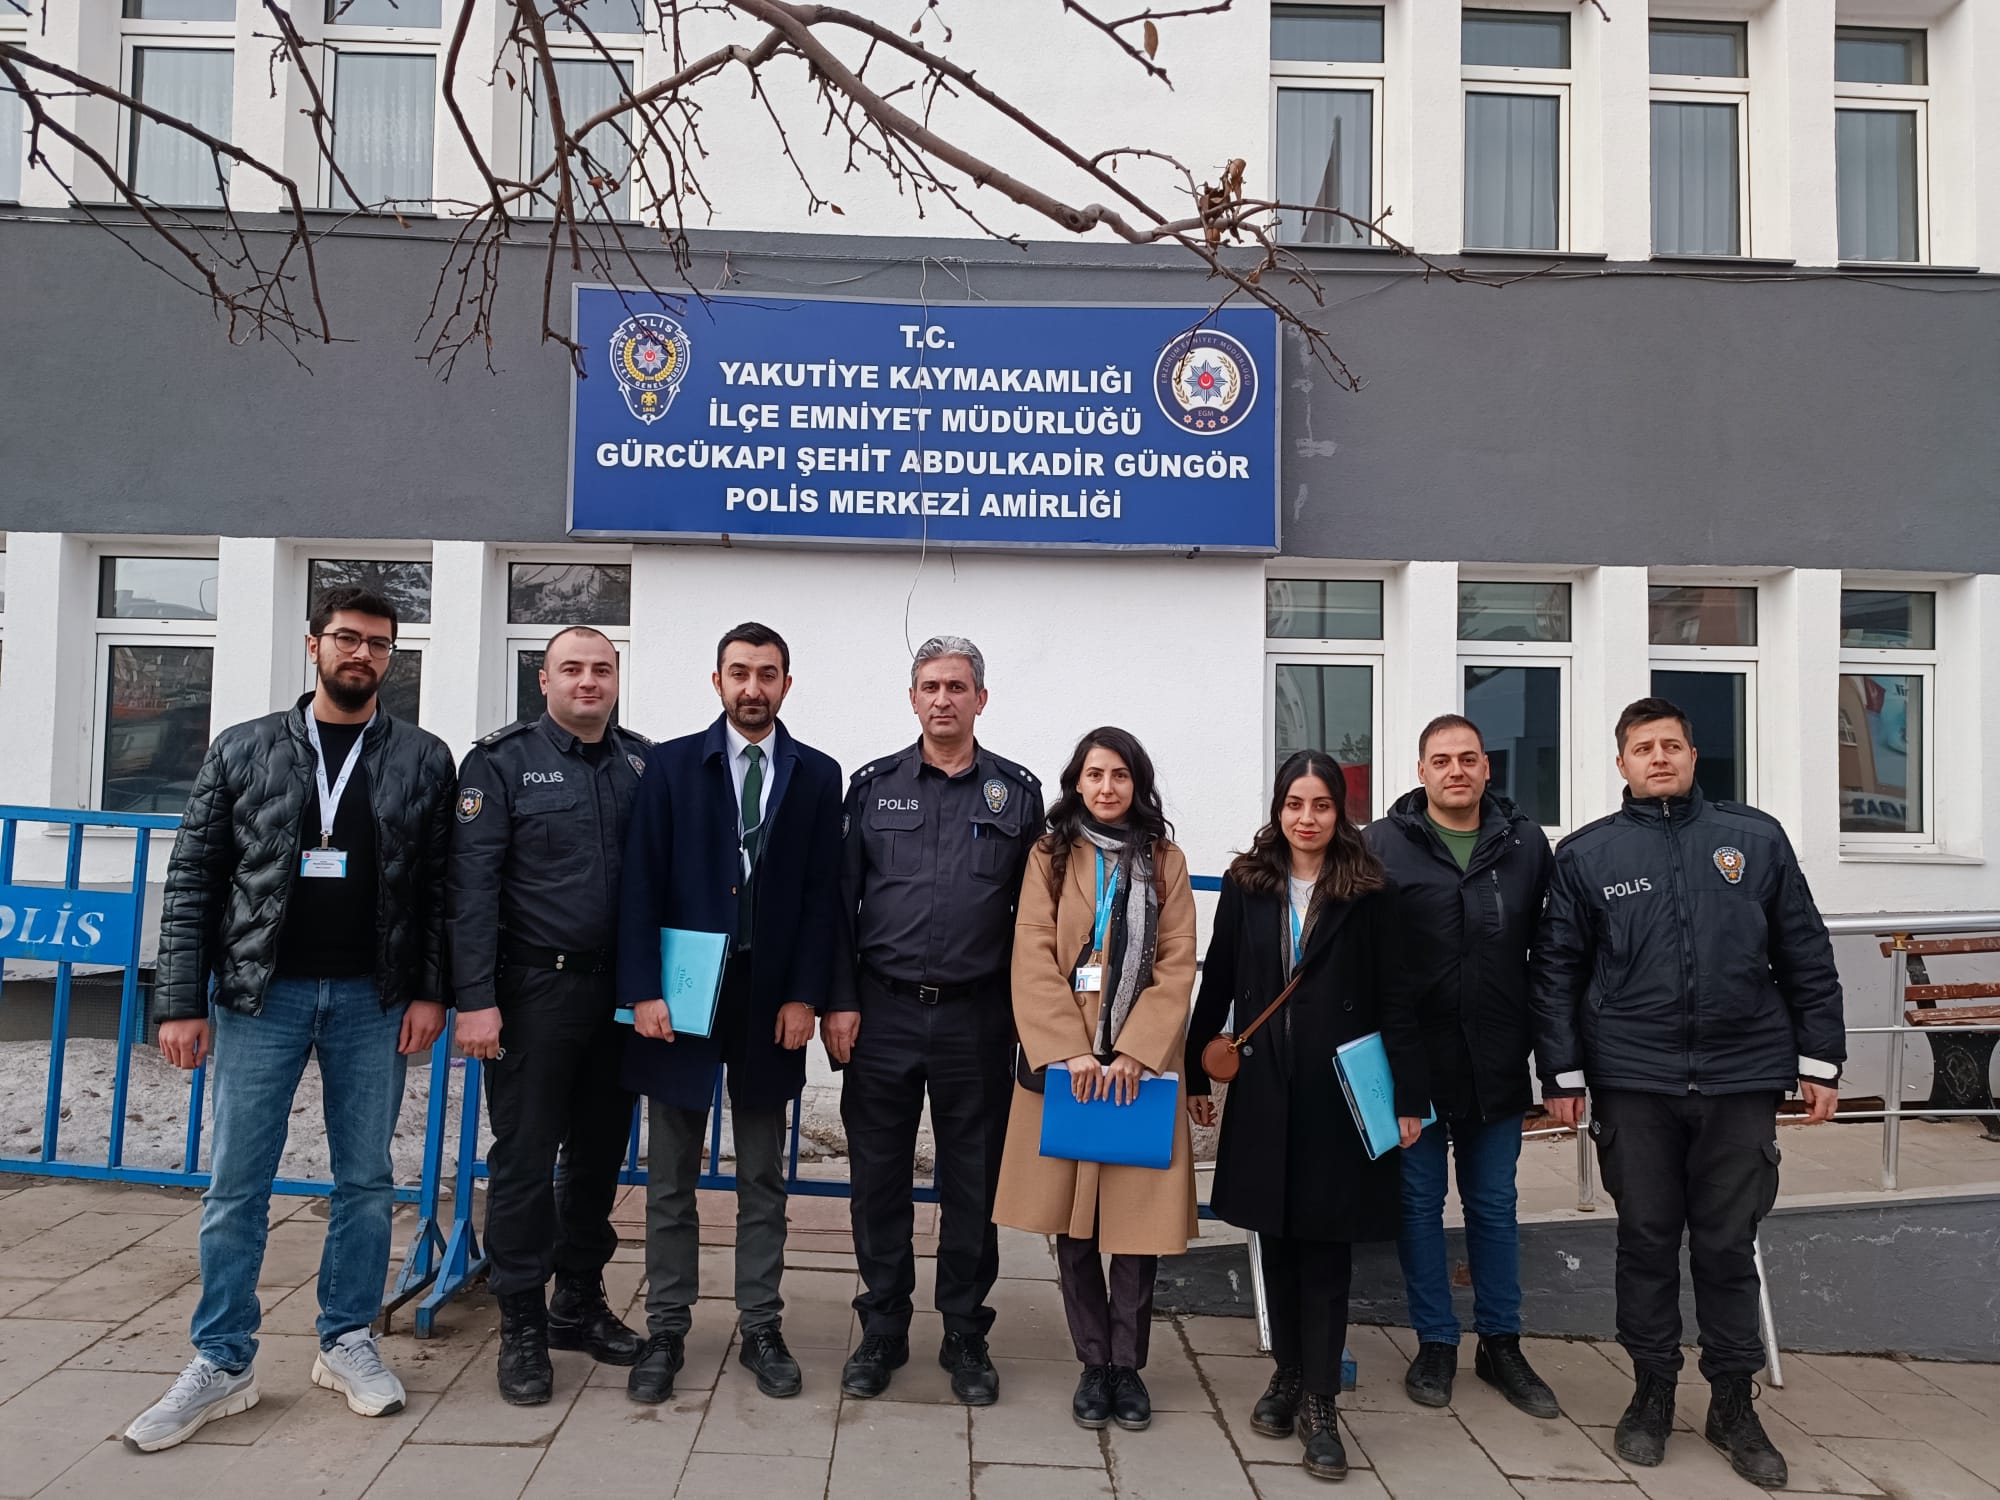 HREIT Delegation Conducted an Unannounced Follow-Up Visit to Erzurum Provincial Police Department Custody Centers